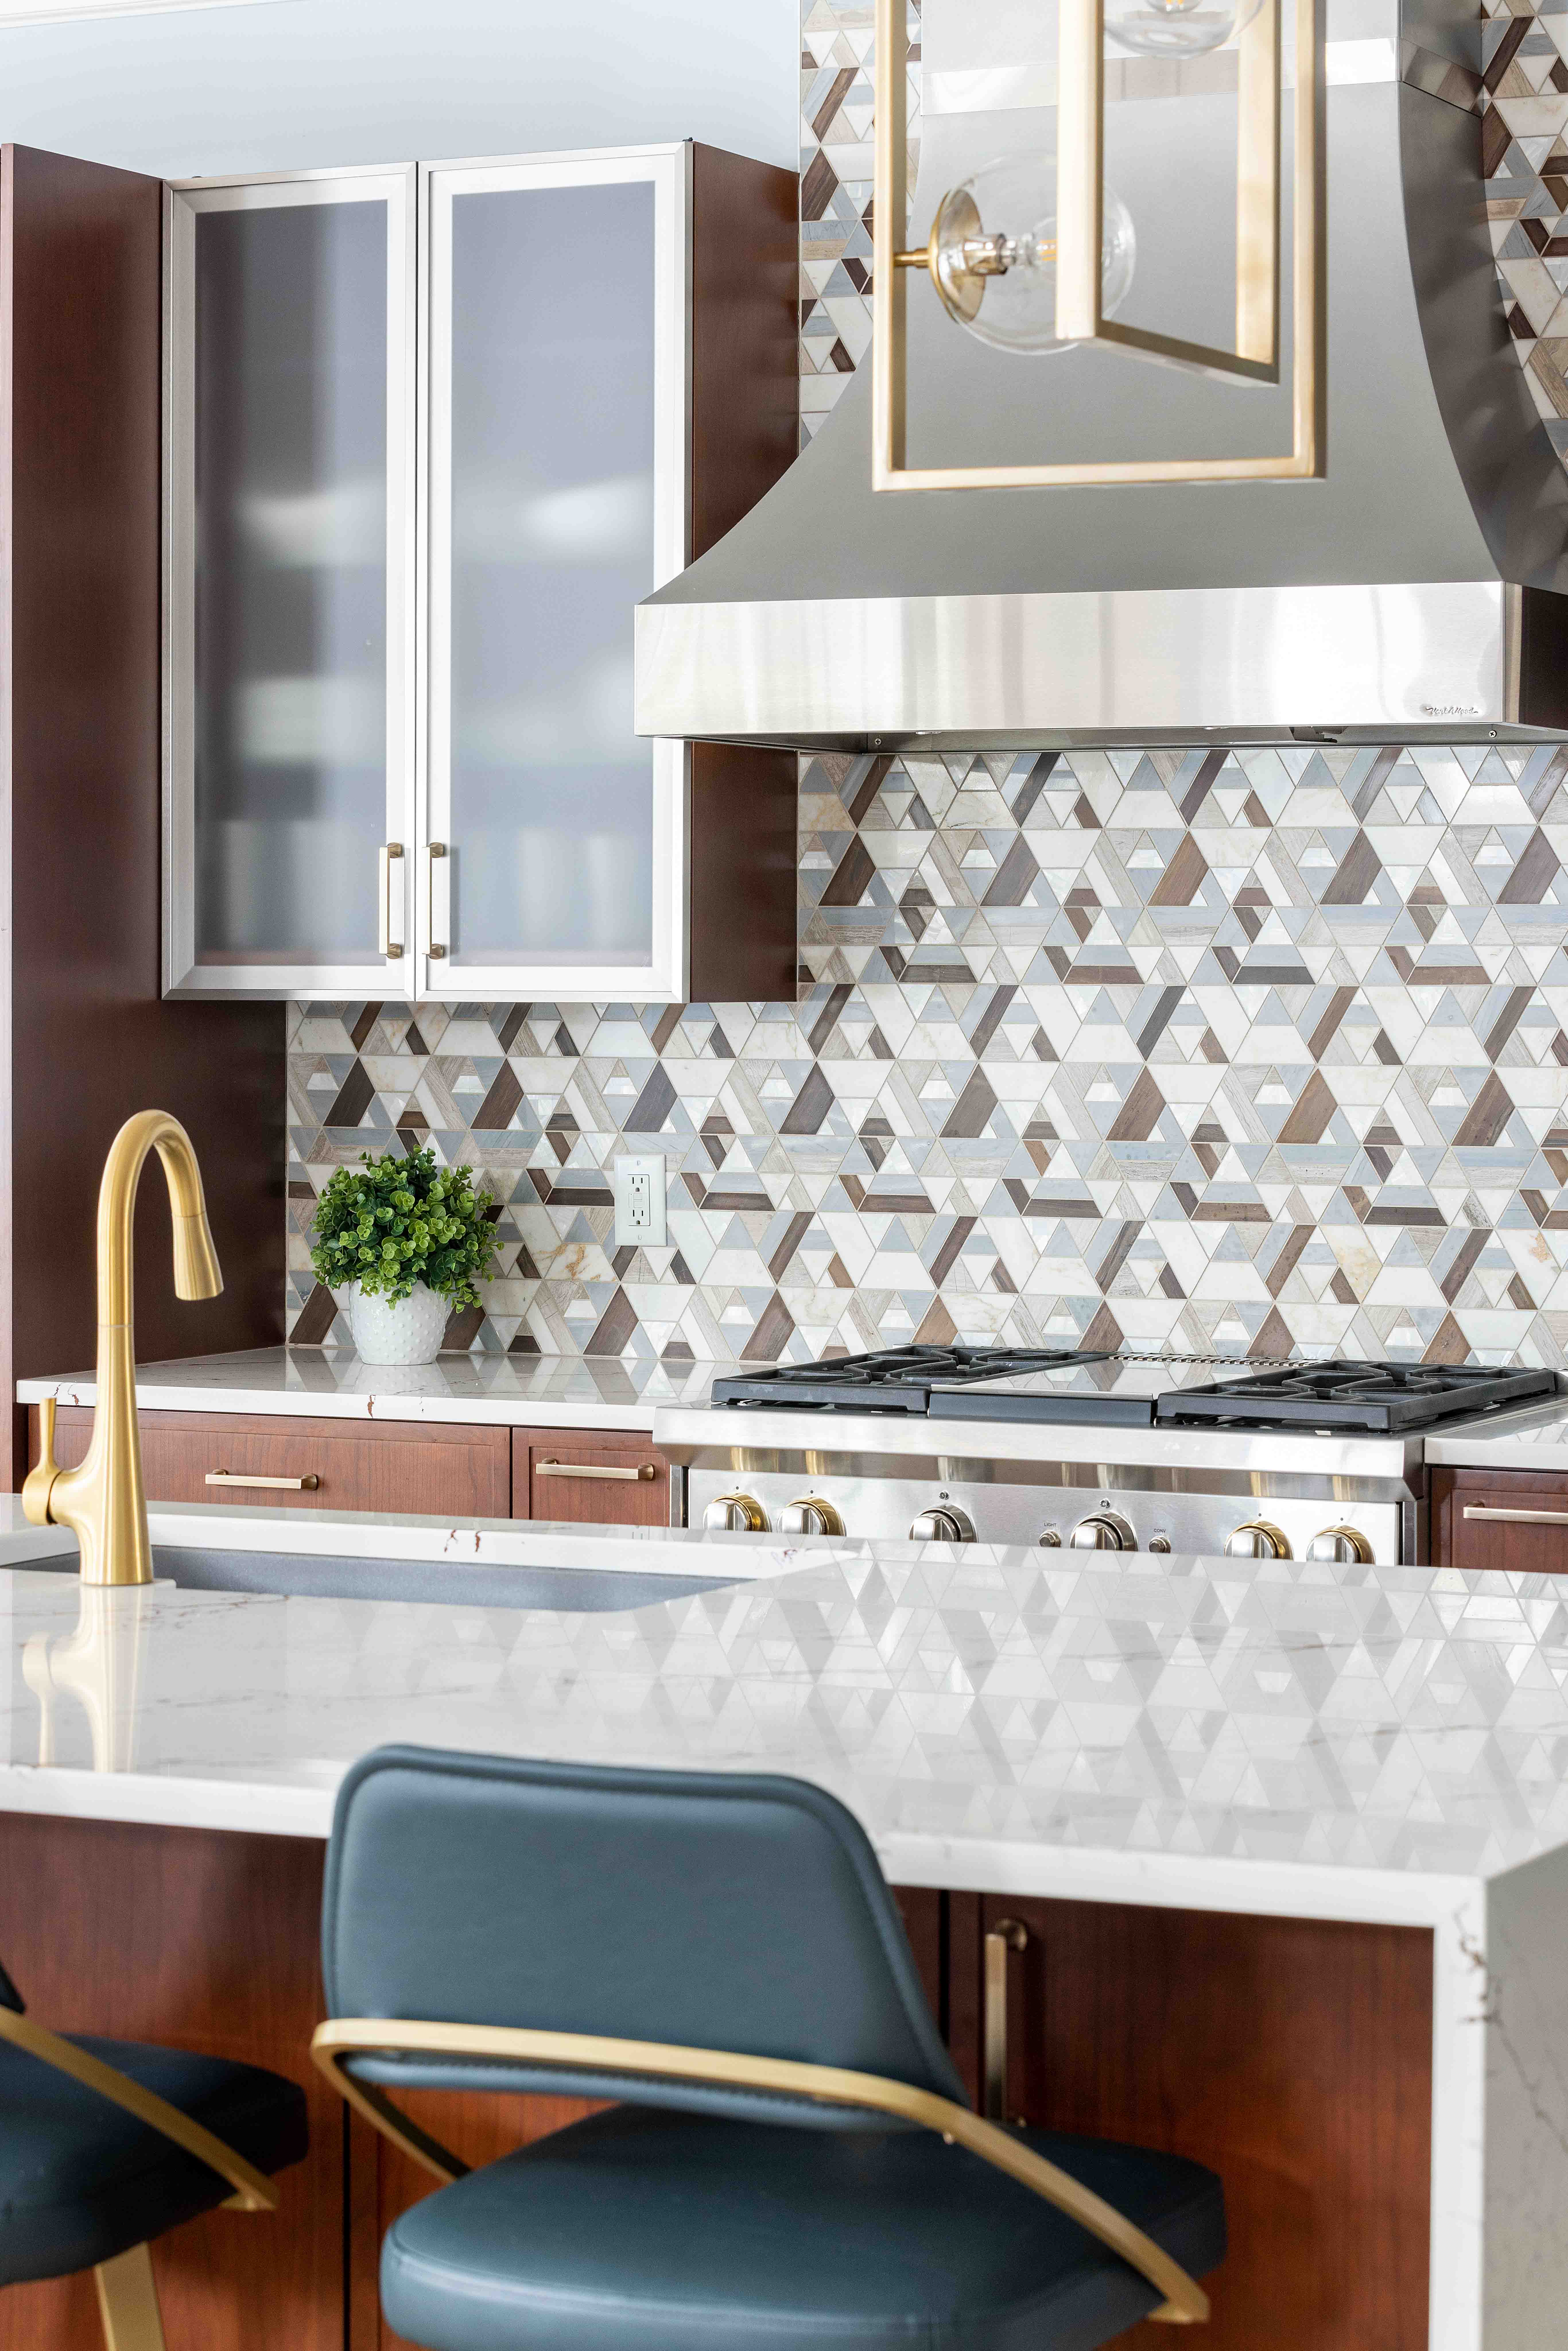 Kitchen remodel with patterned tile backsplash, blue leather bar stools, and mixed metal fixtures